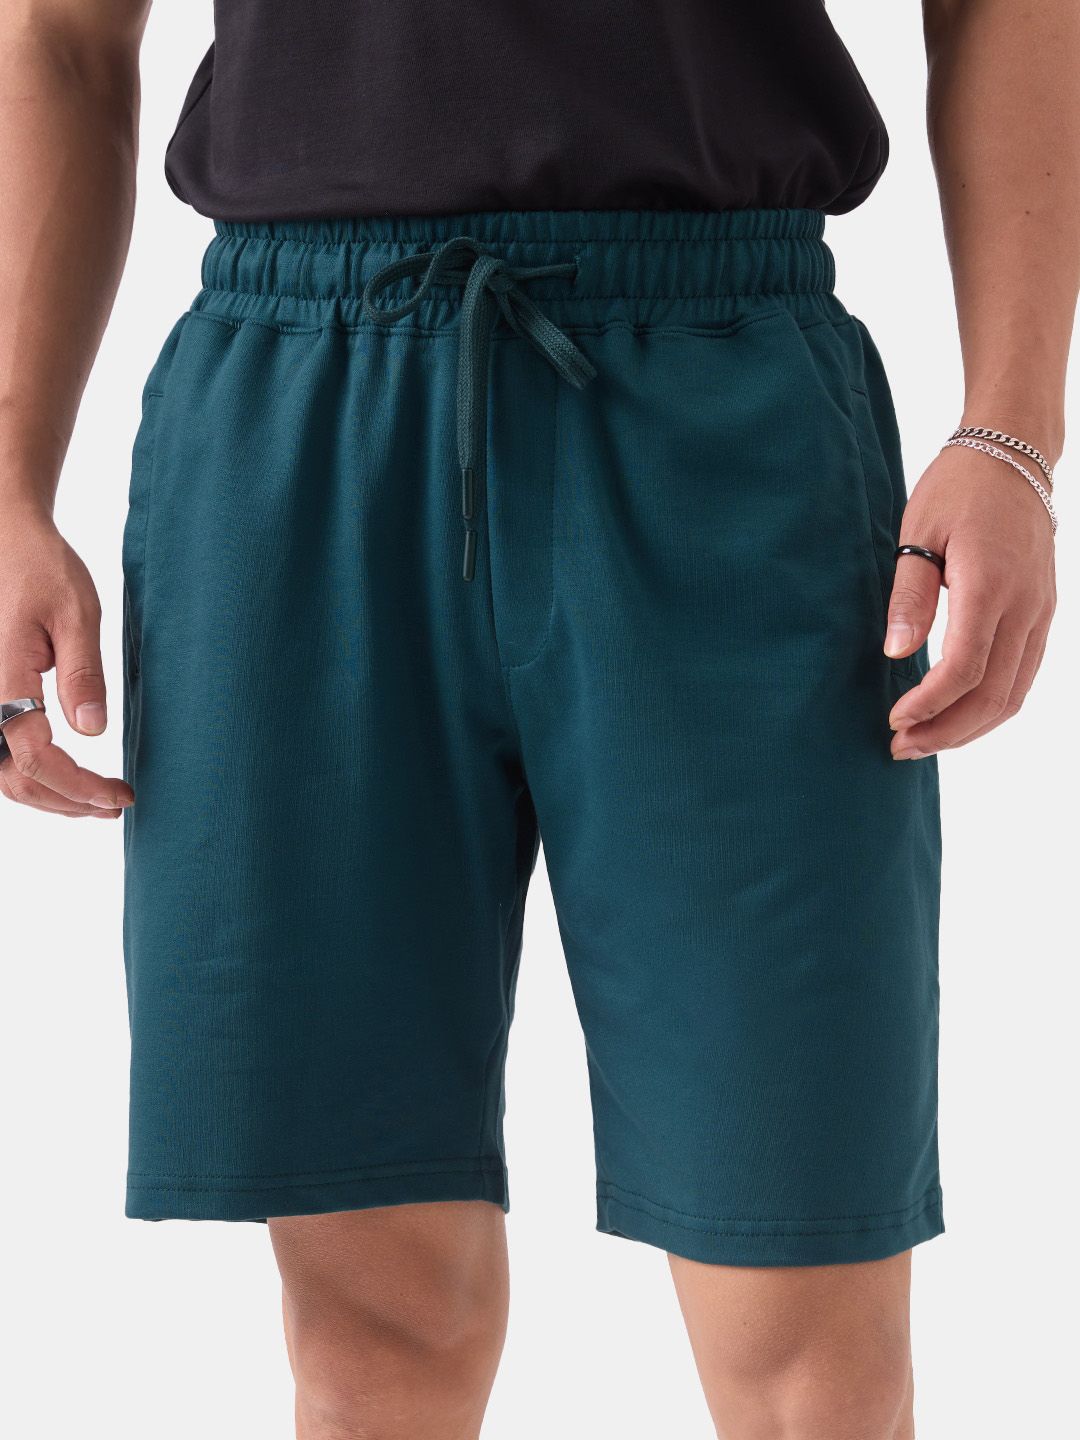 The Souled Store Men Teal Mid Rise Shorts